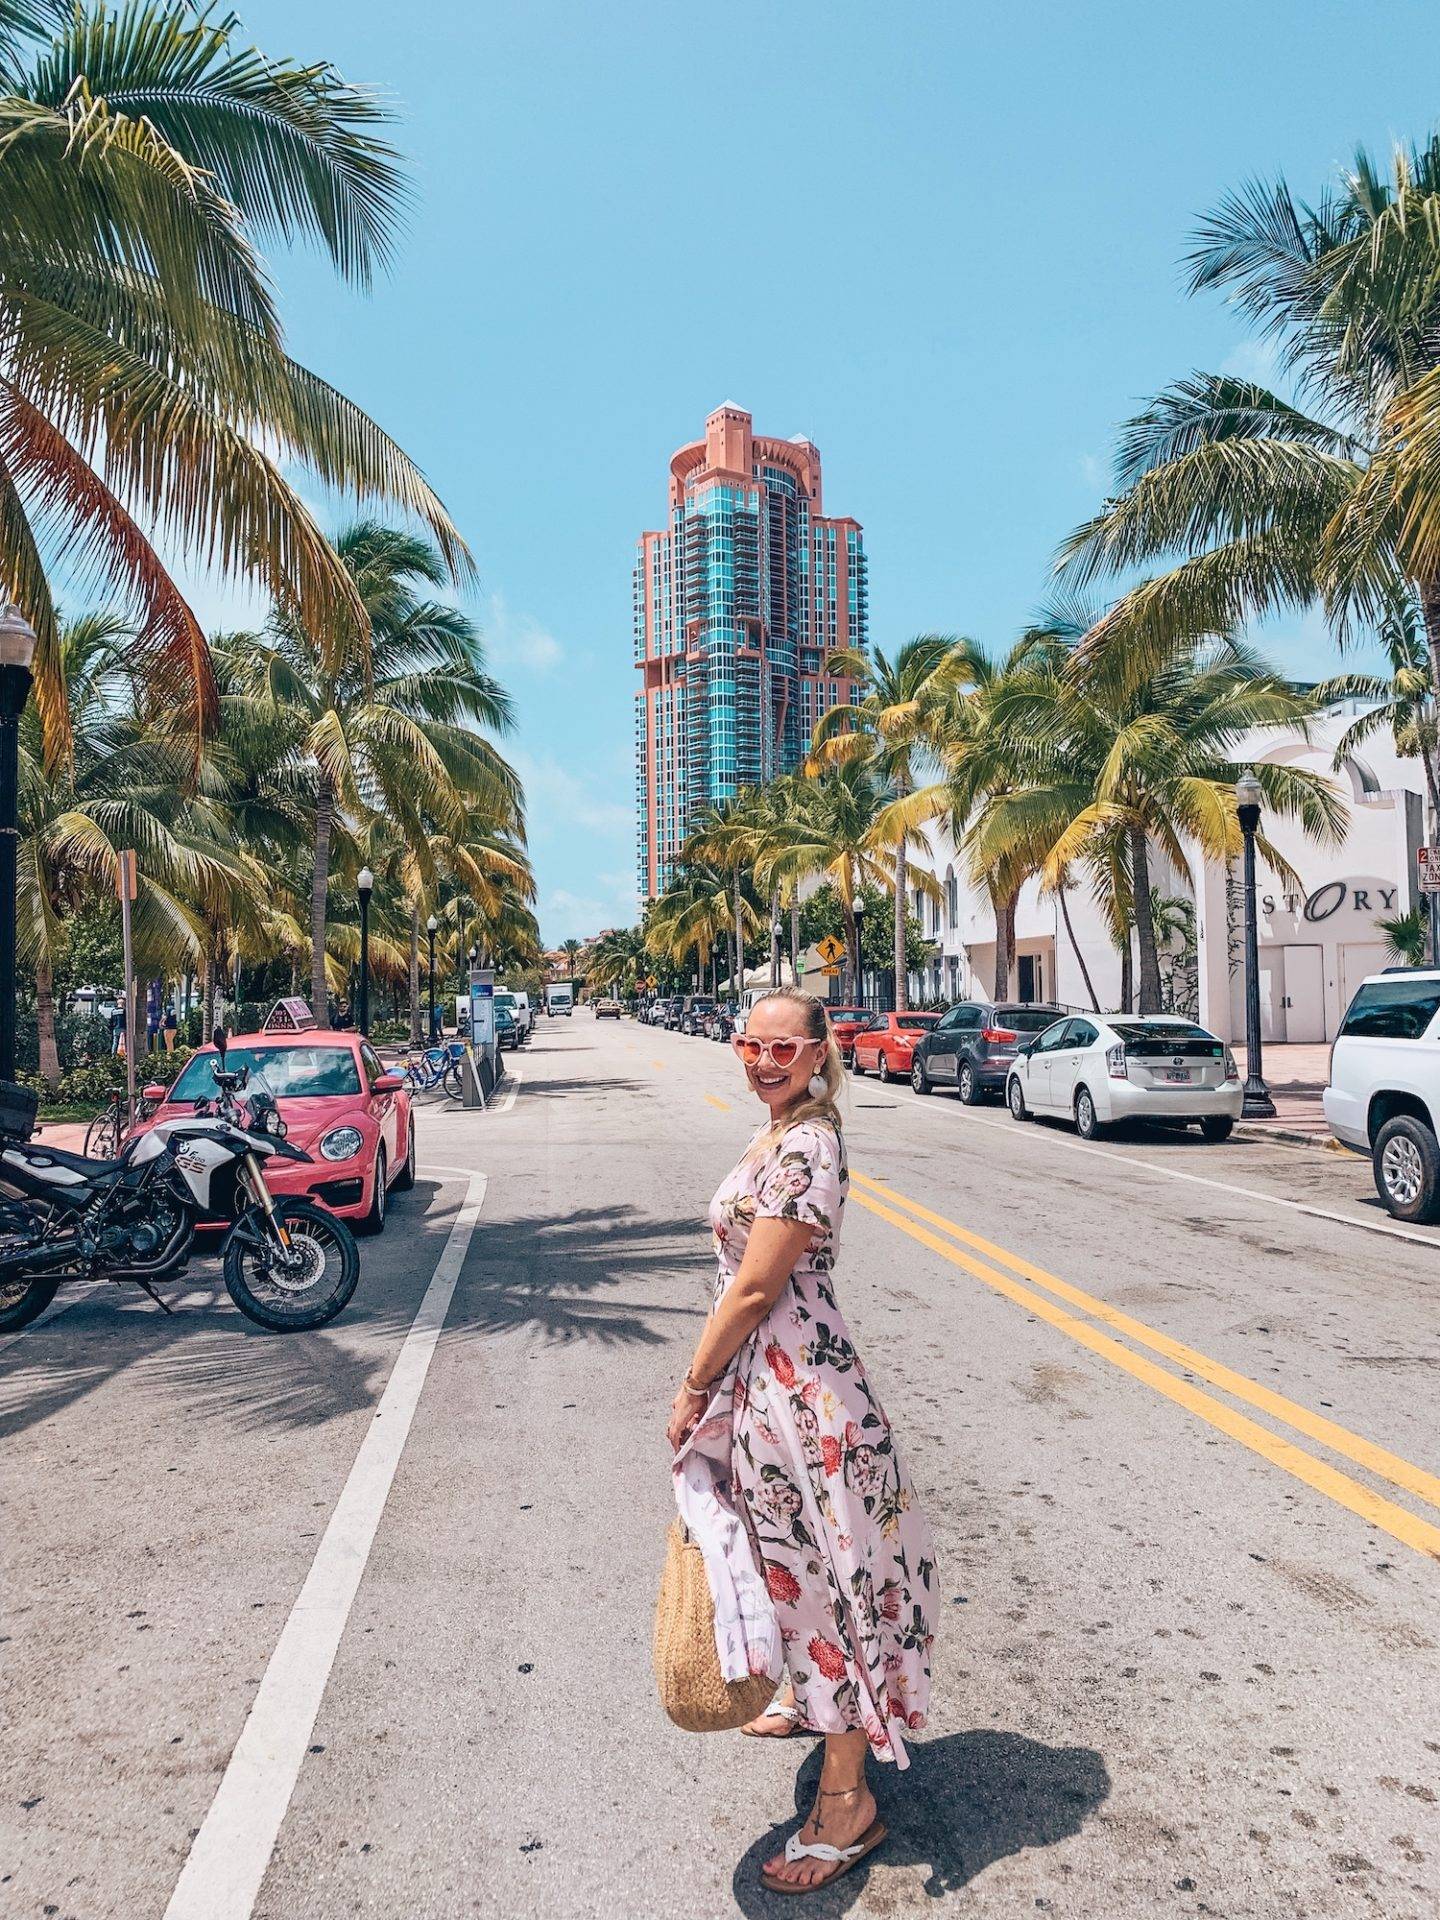 Miami Design District Travel Tips - Best Hotels, Restaurants, Shopping and  Things to do in Miami, Florida